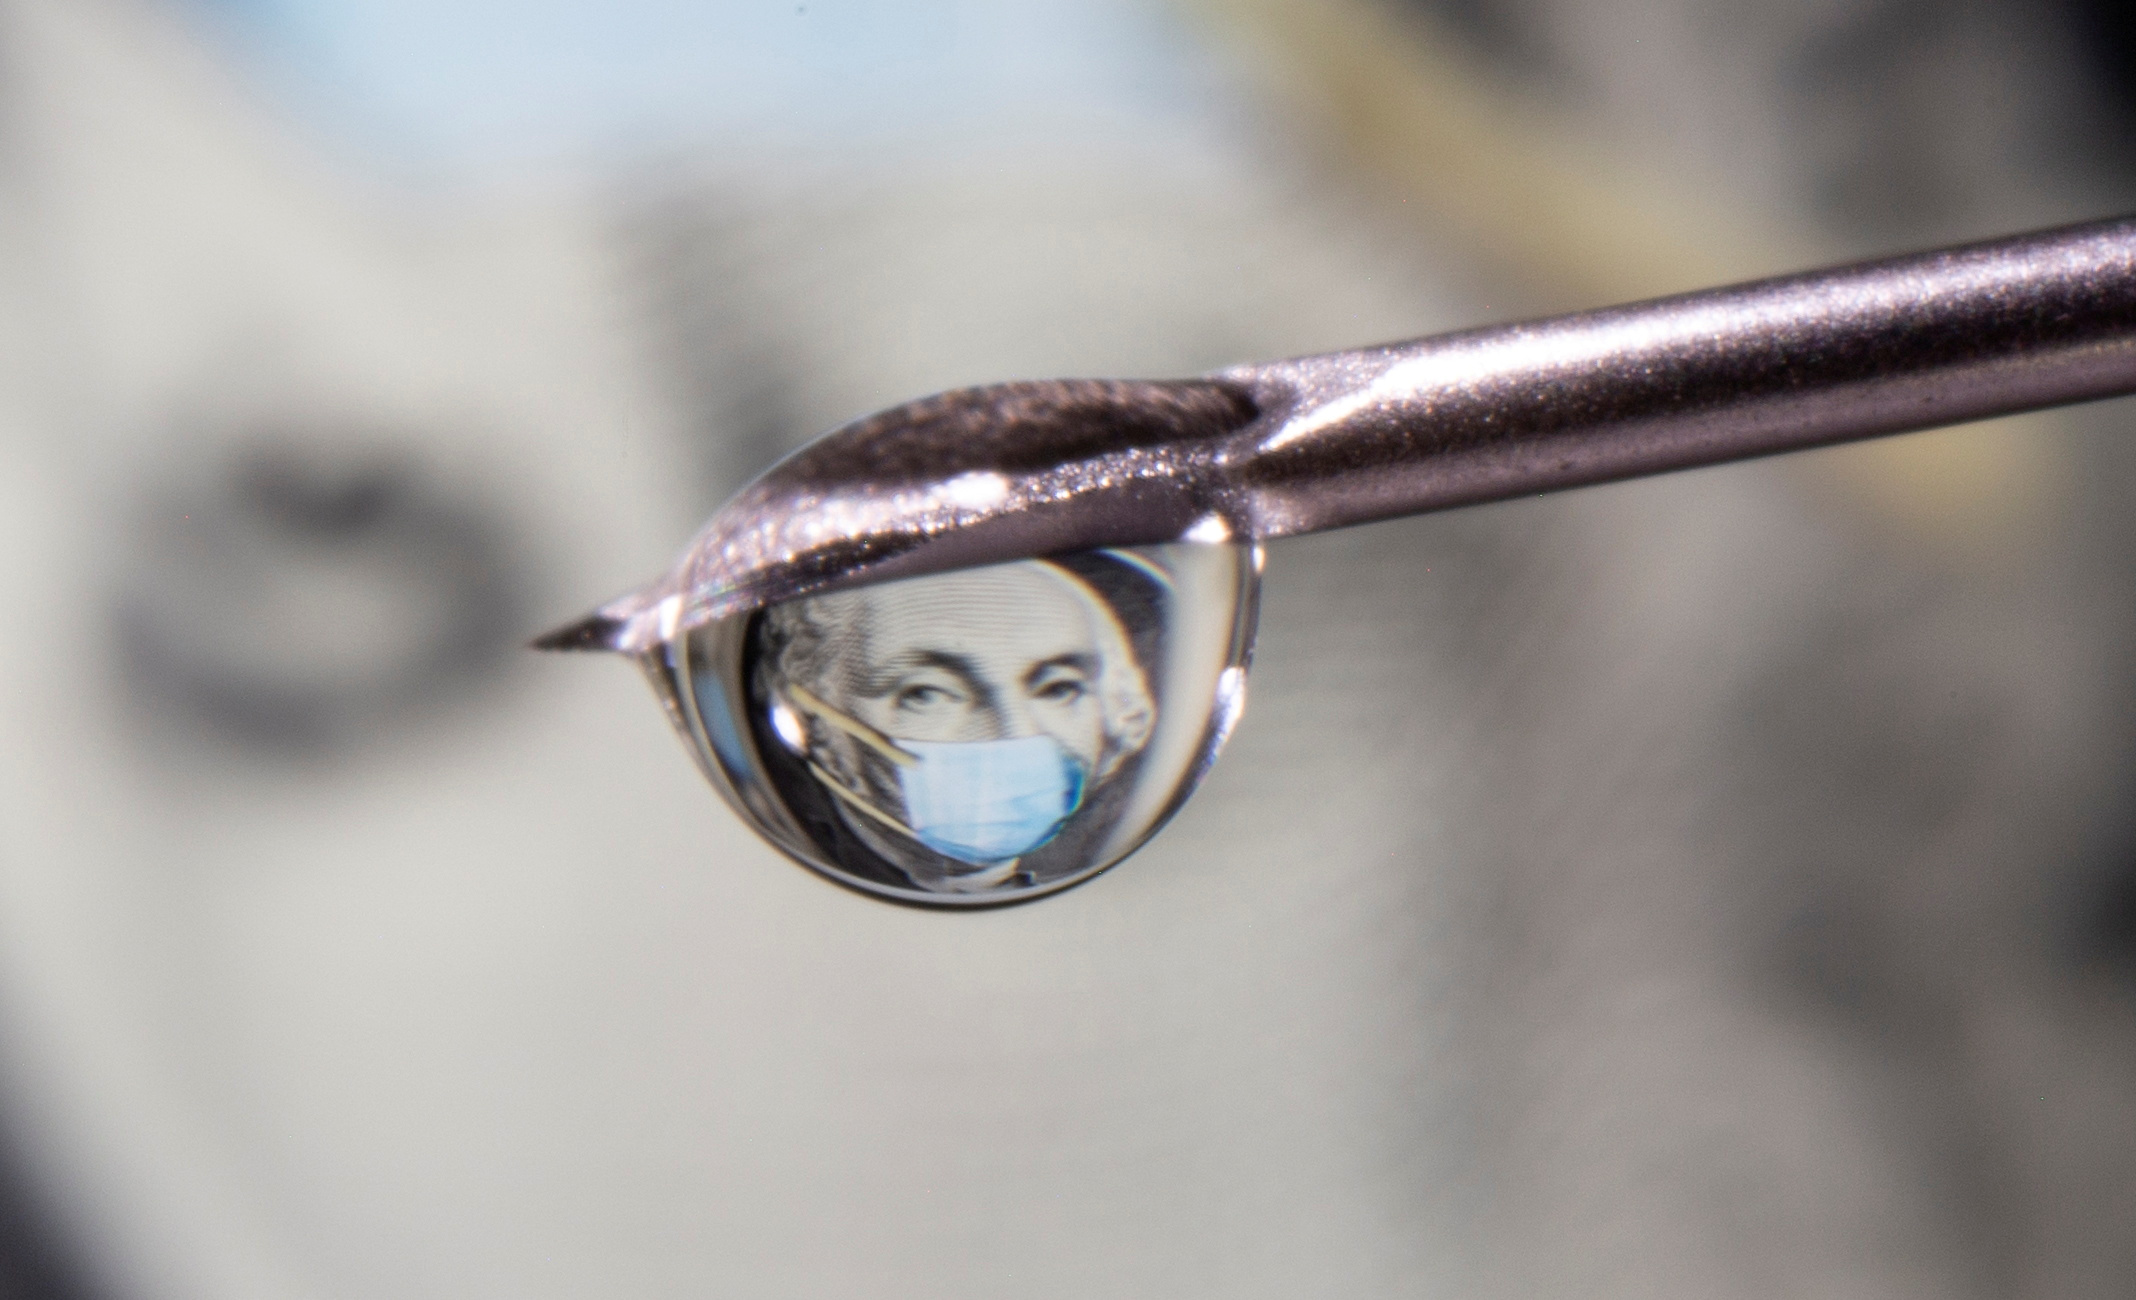 George Washington is seen with a printed medical mask on a one dollar bill reflected in a drop on a syringe needle in this illustration